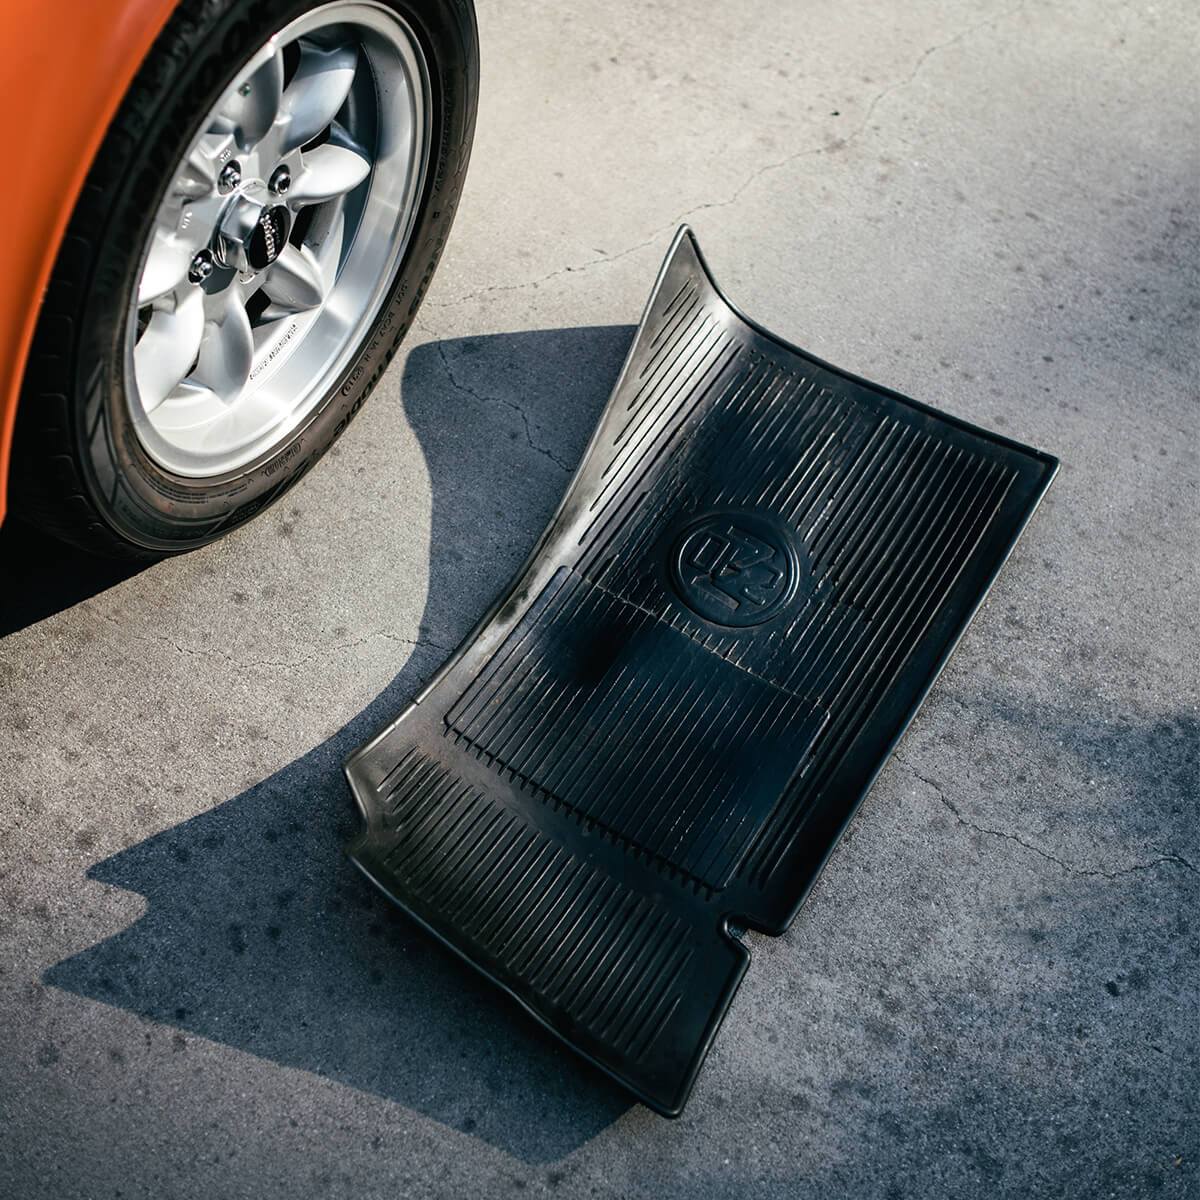 https://cdn.shopify.com/s/files/1/0261/5033/8613/t/6/assets/bbf7040efbc5--How-To-Clean-And-Restore-Rubber-Floor-Mats-Block-3-305828.jpg?v=1629227135